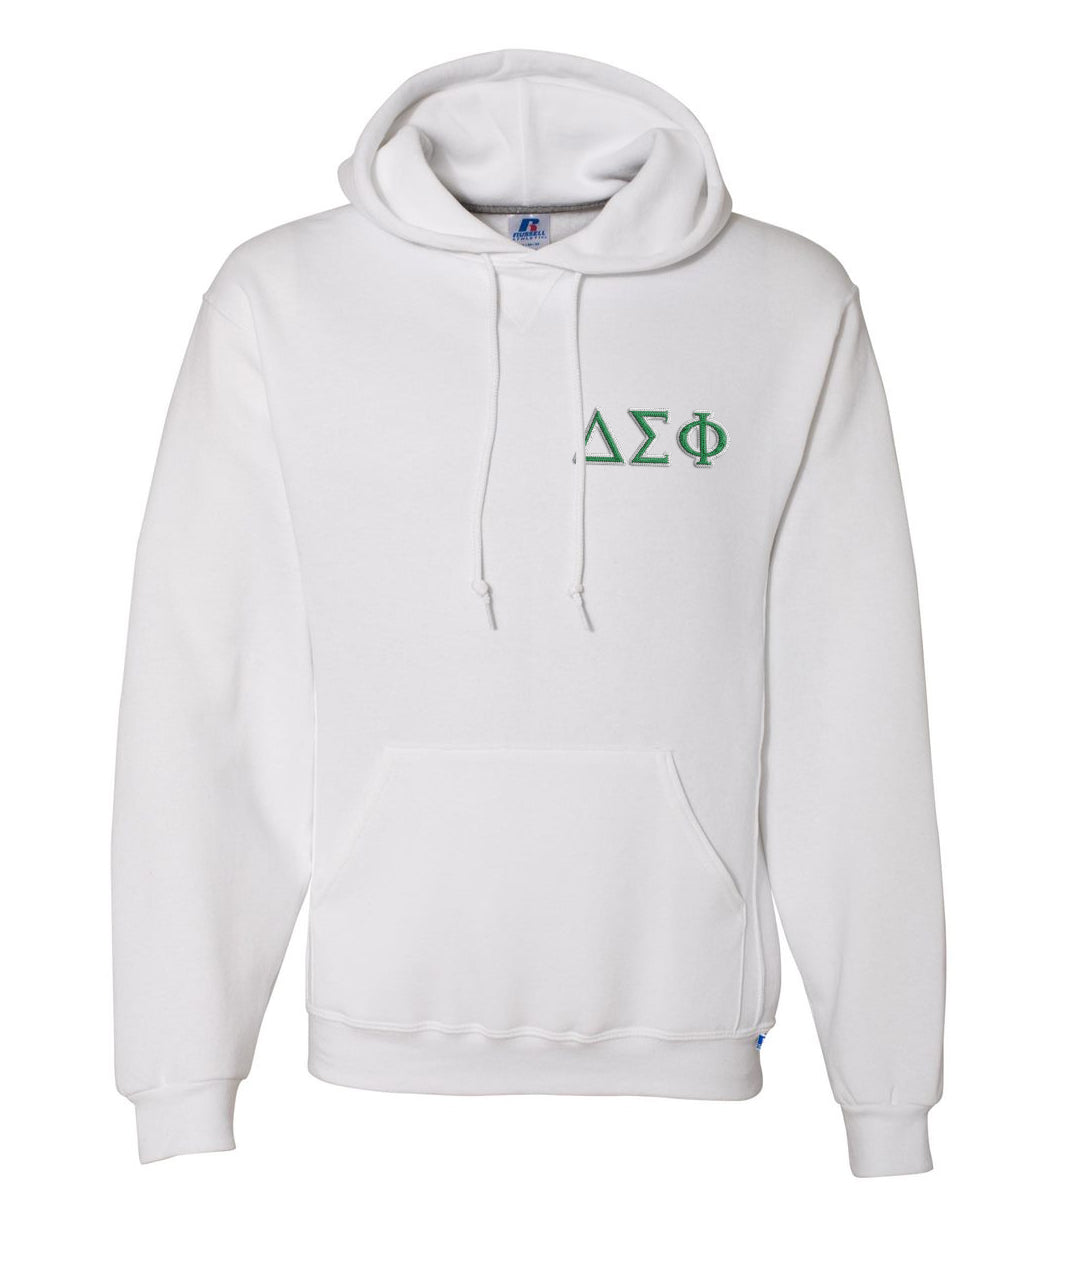 Delta Sigma Phi Embroidered Hoodie